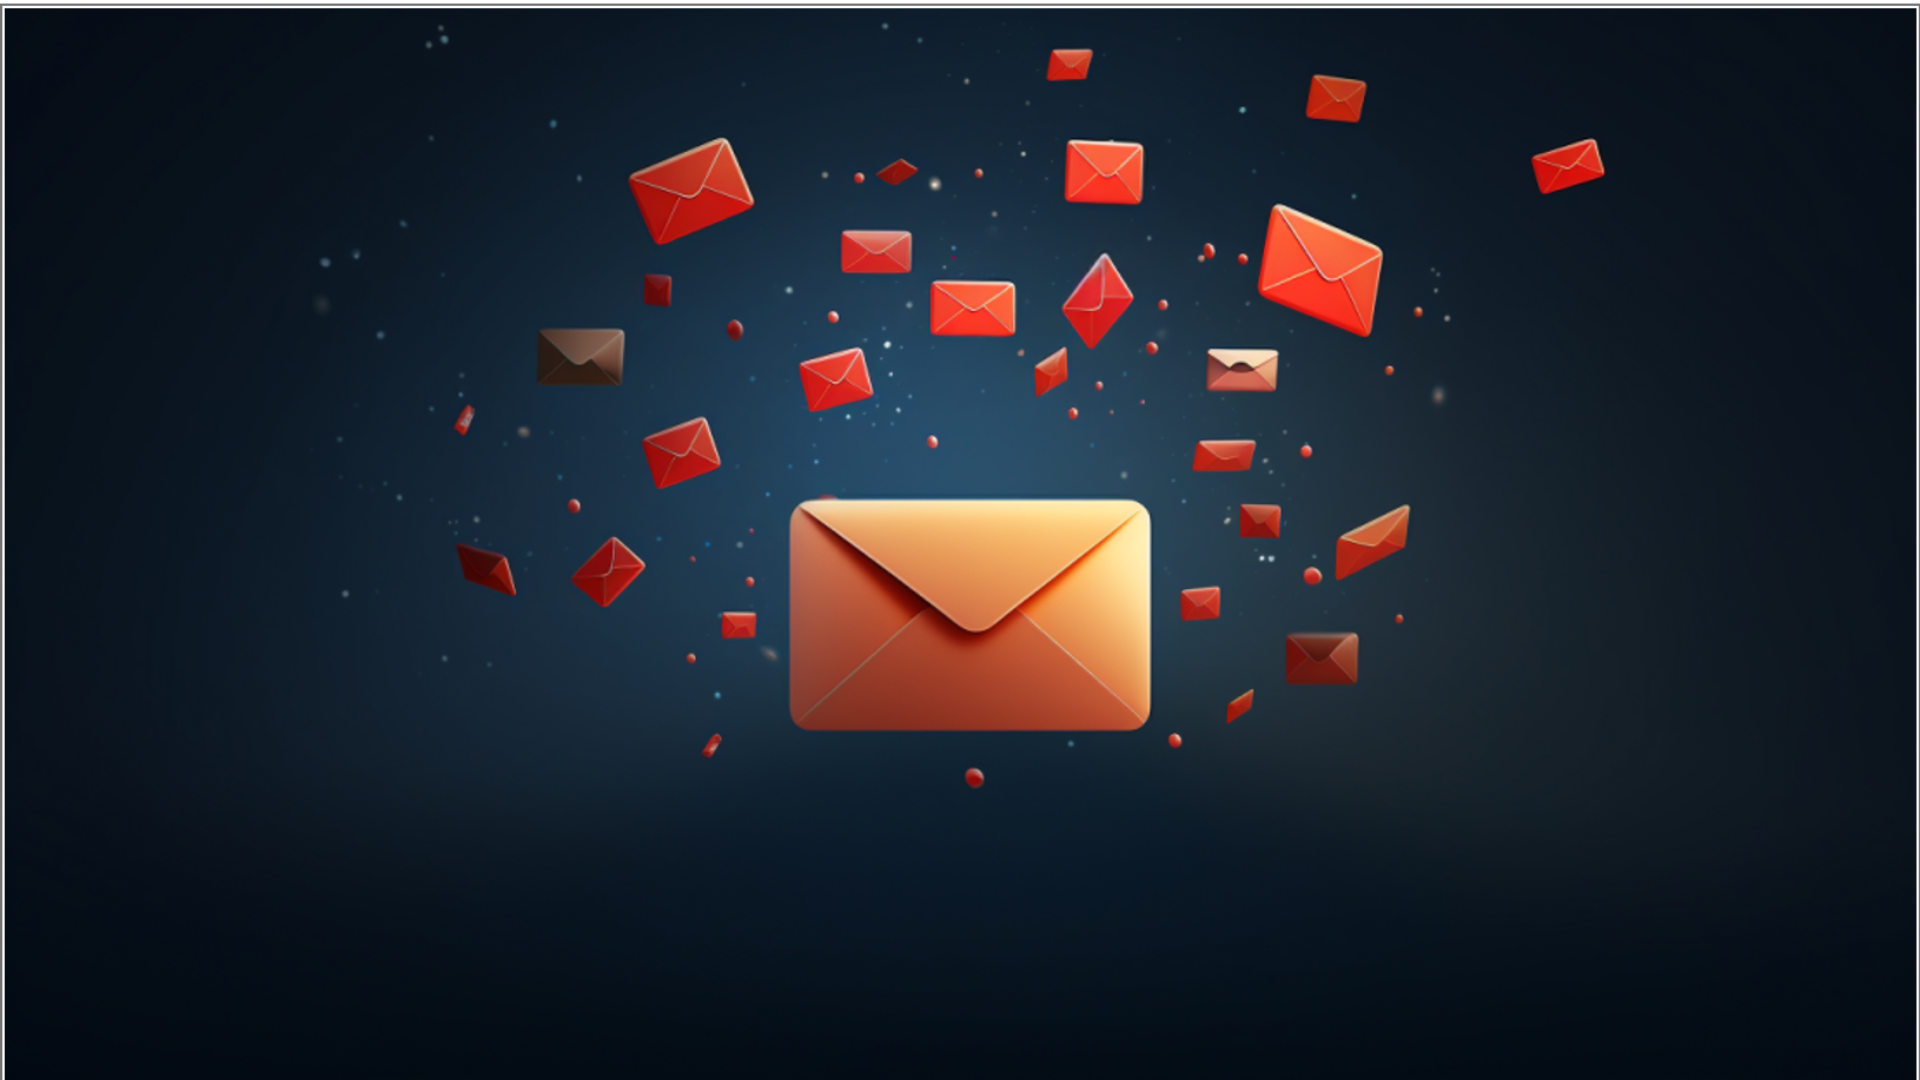 Image for email (stylized)